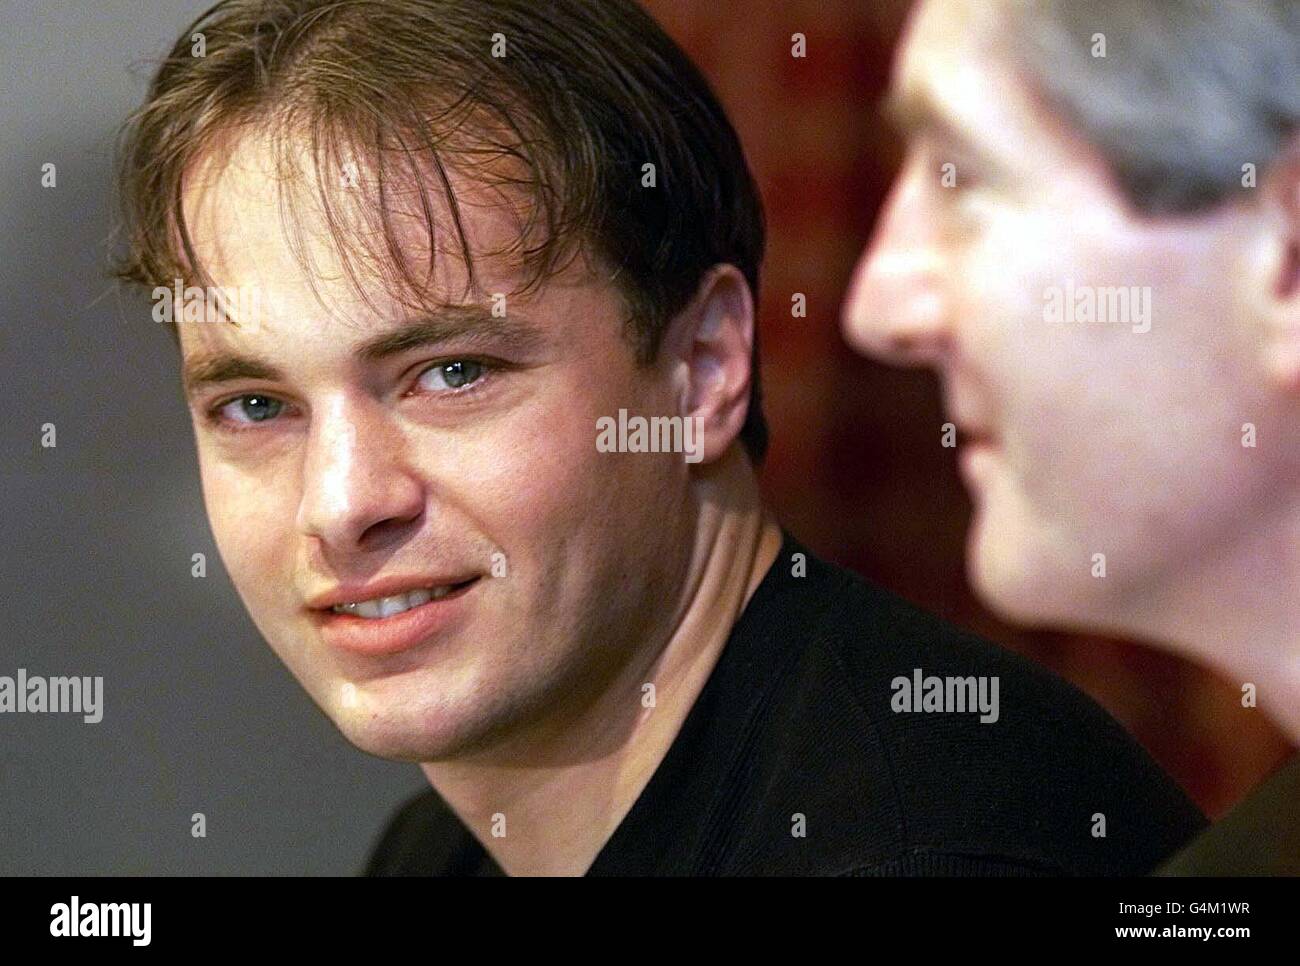 This picture may only be used in the context of an editorial feature. Manchester United's latest signing Mark Bosnich, who is to replace Peter Schmeichel as United's goalkeeper, is unveiled at a press conference at Old Trafford. * 4/6/99: On the day of his wedding, Mark was arrested by police on suspicion of robbery. Alleged incident occured outside Legs Eleven Nightclub in Birmingham, while he was out celebrating his stag night. Released from custidy in time for wedding. * 15/08/00 Manchester United goalkeeper Mark Bosnich's bad luck continued when his car was left sandwiched between two Stock Photo